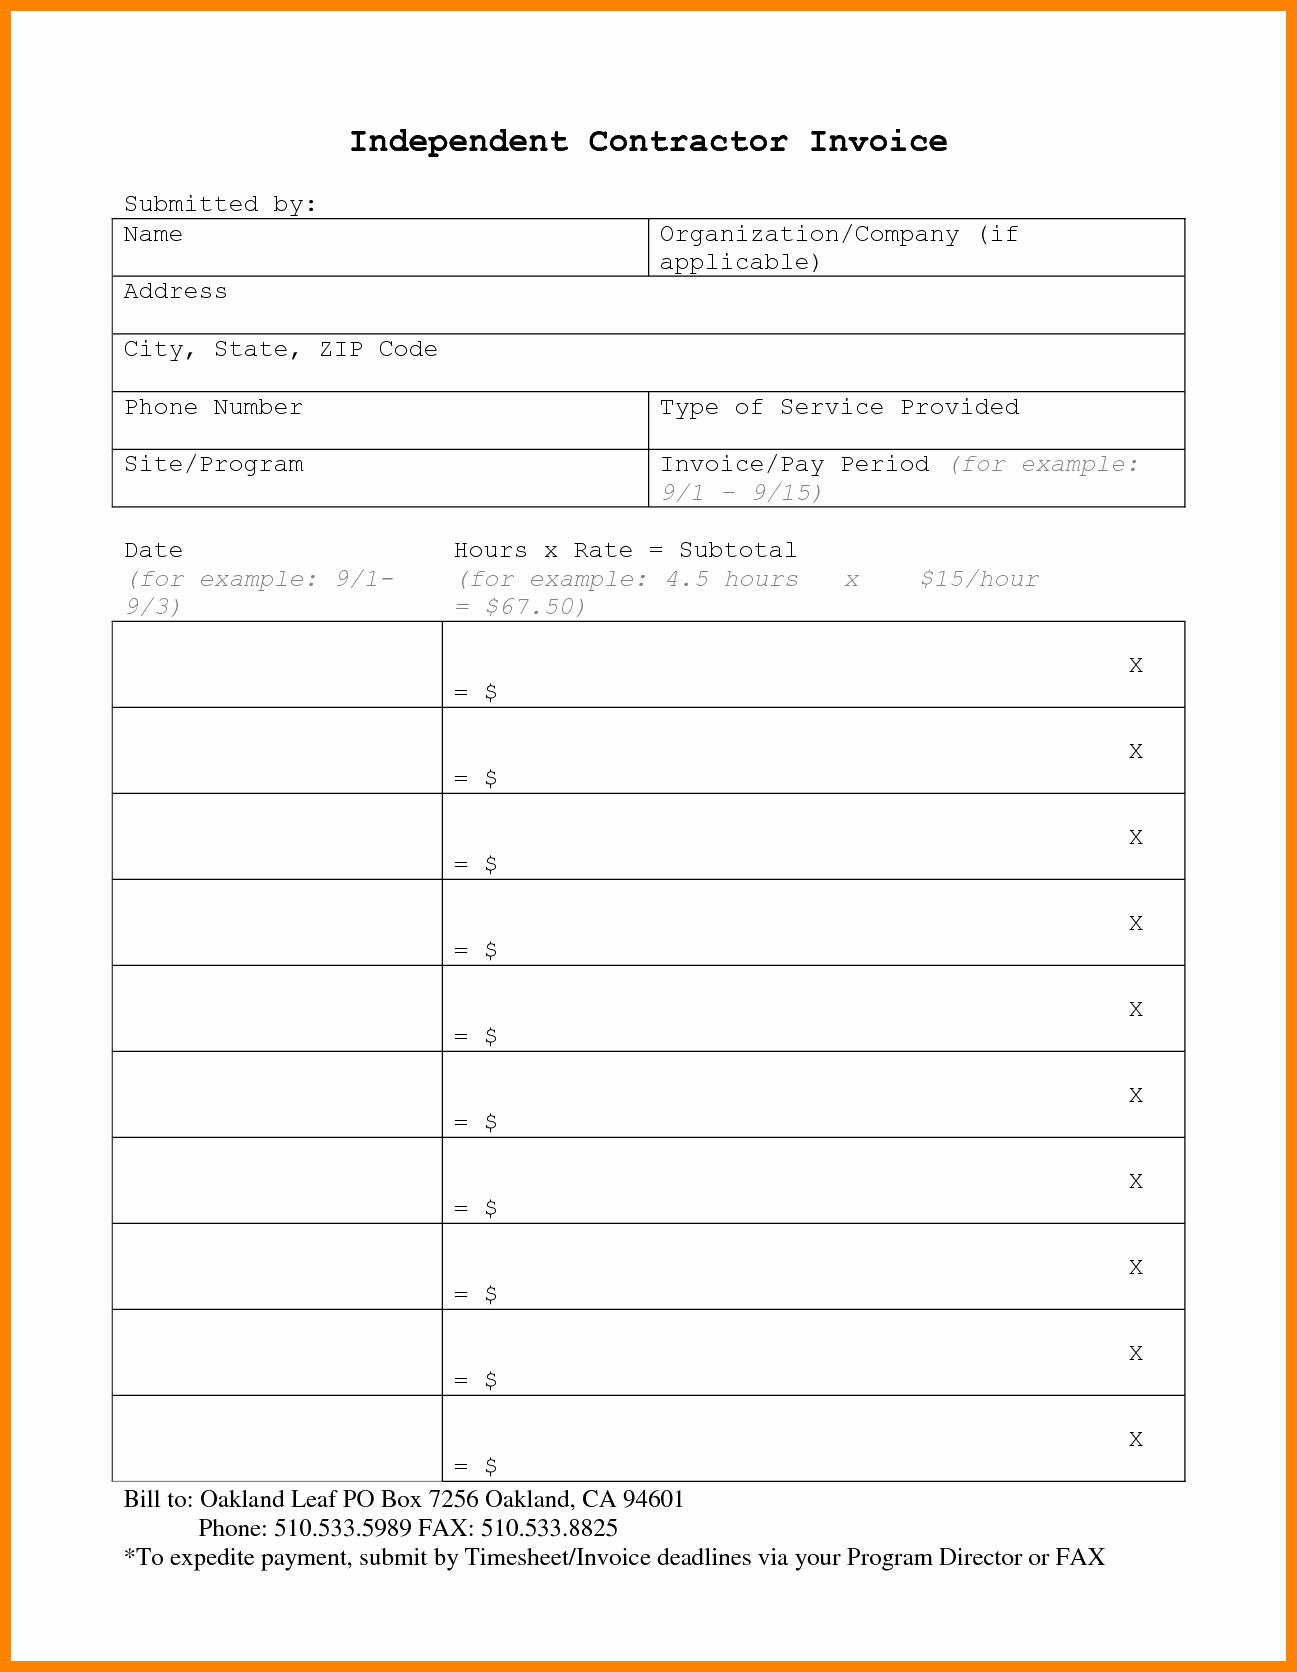 Independent Contractor Invoice Template Pdf Luxury 5 Independent Contractor Invoice Template